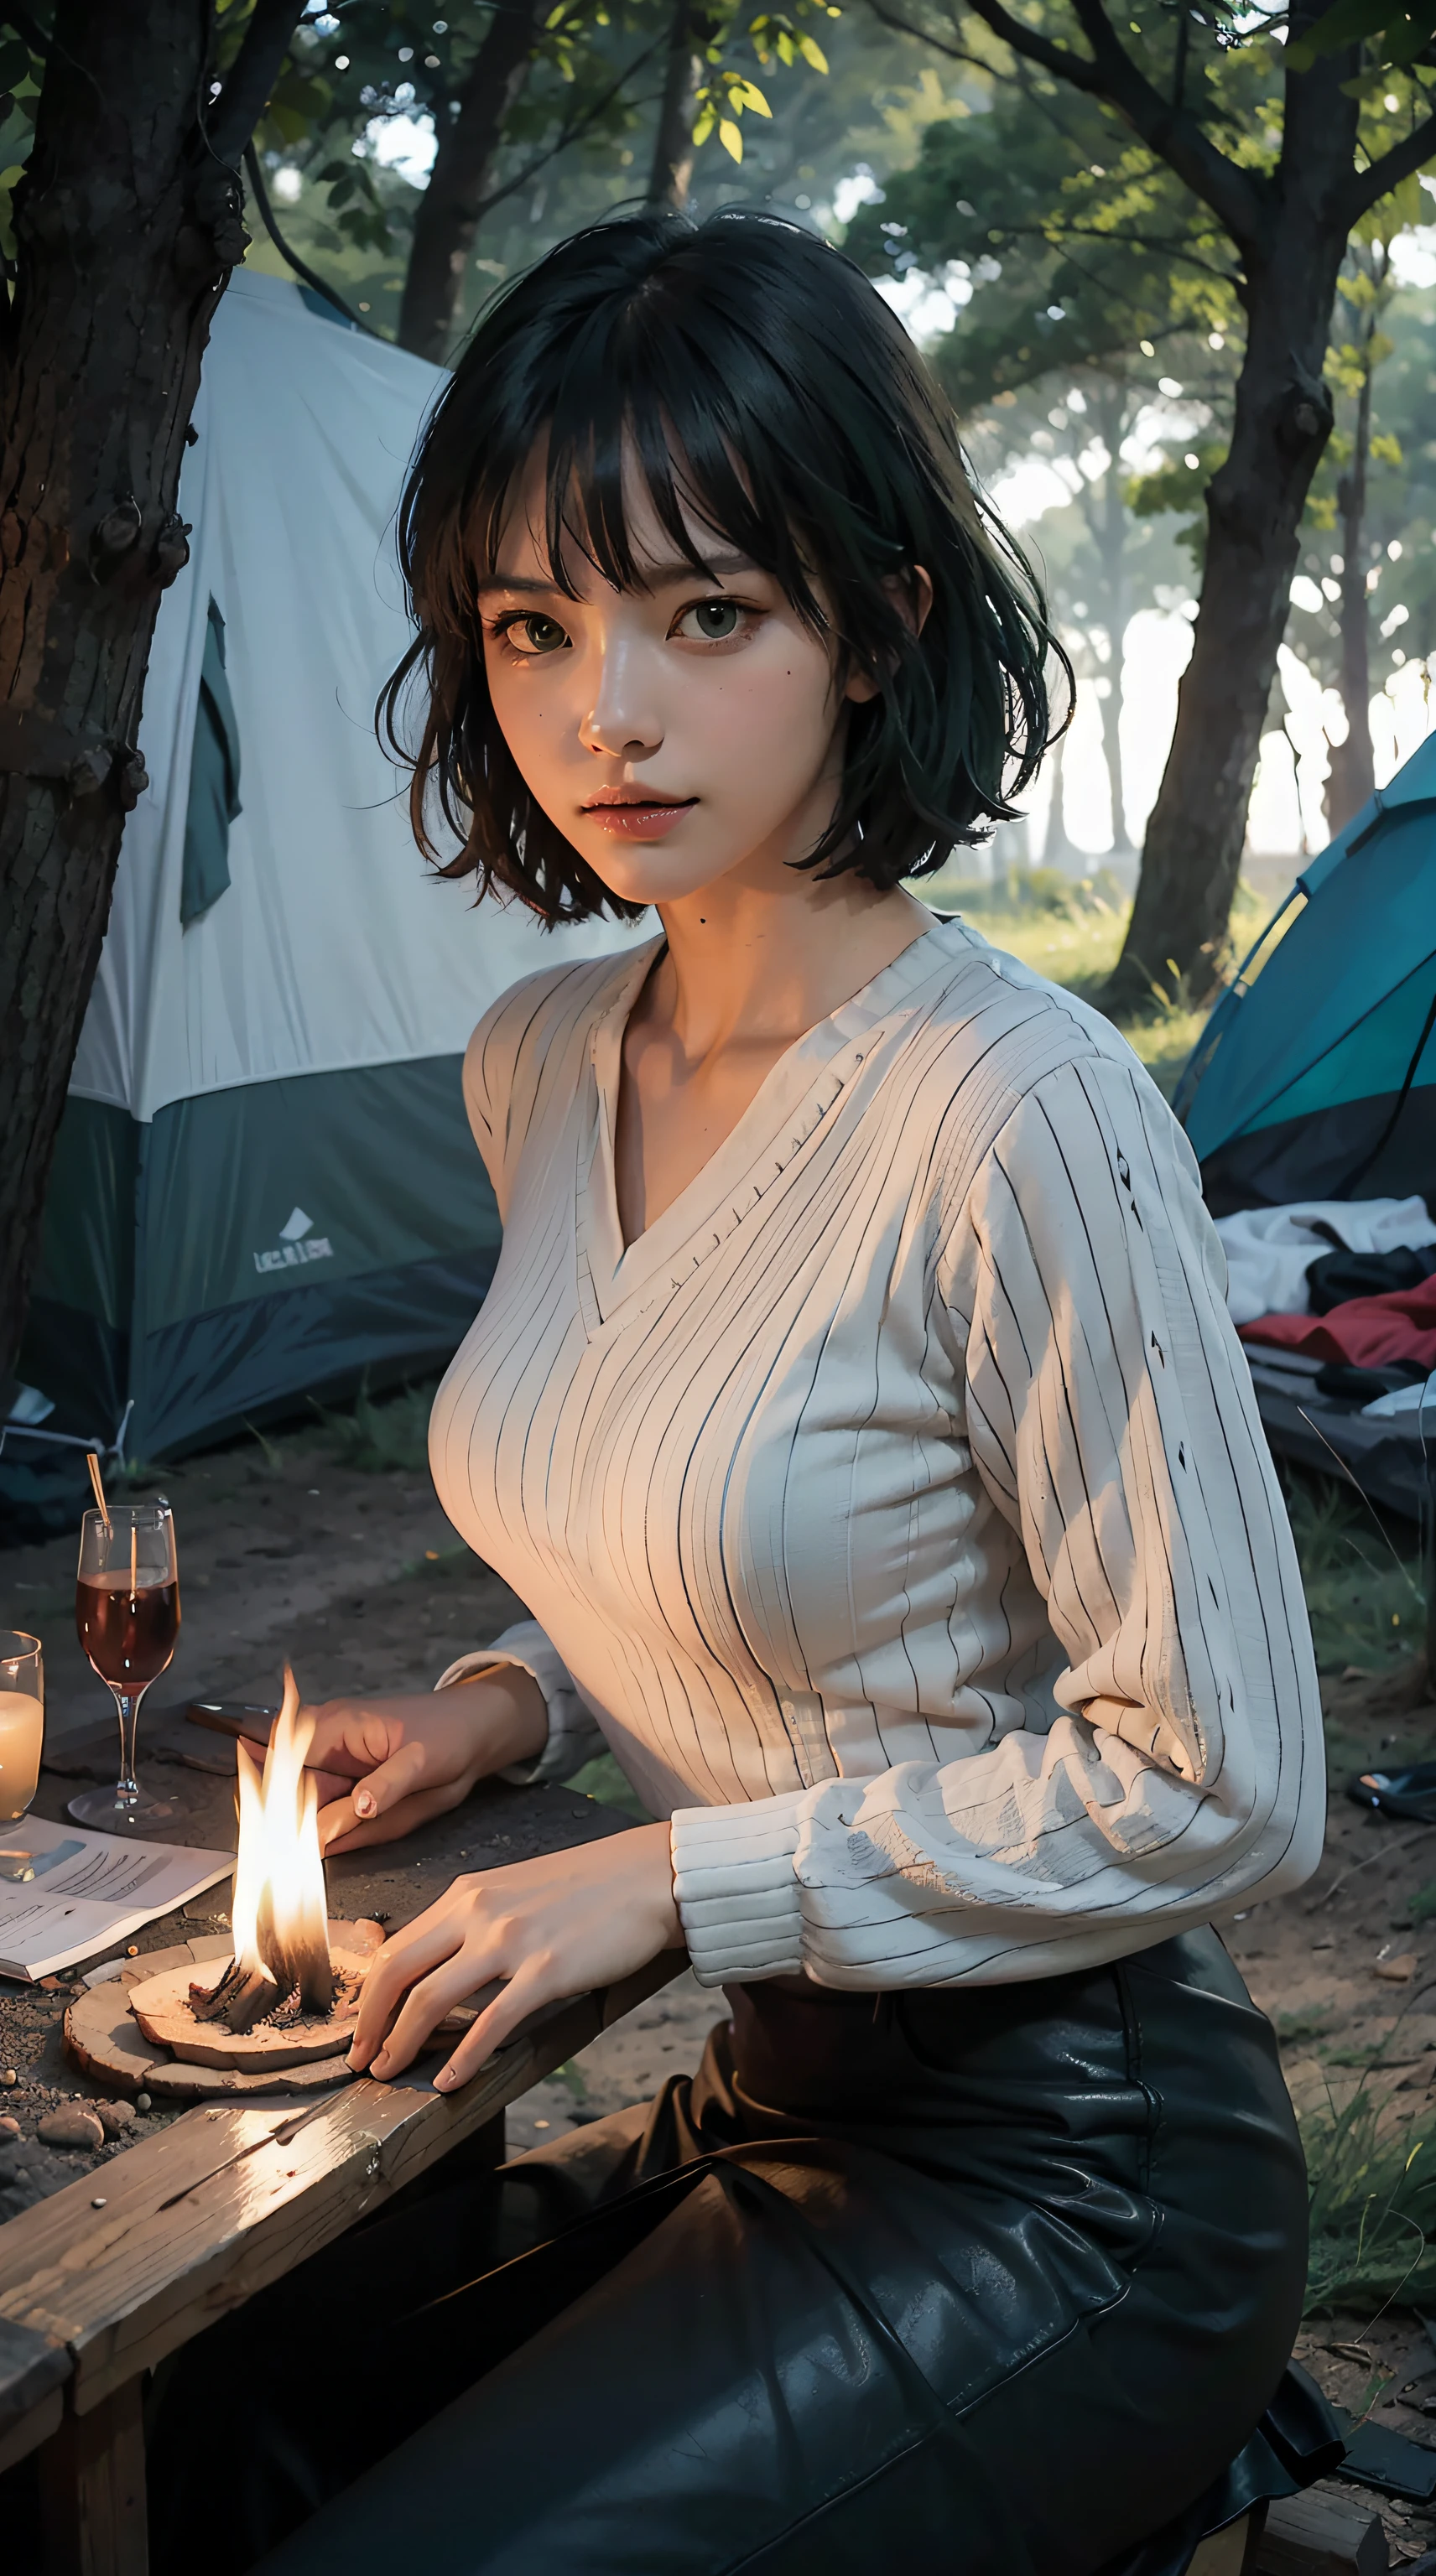 fubuki, 1girl, solo, green eyes, green hair, looking at viewer, sitting on a log, beautiful, beautiful woman, perfect body, perfect breasts, wearing a sweater, in the forest, being camping, camping tent, trees, night, evening, campfire, looking at viewer, slight smile, realism, masterpiece, textured leather, super detail, high detail, high quality, best quality, 1080p, 16k